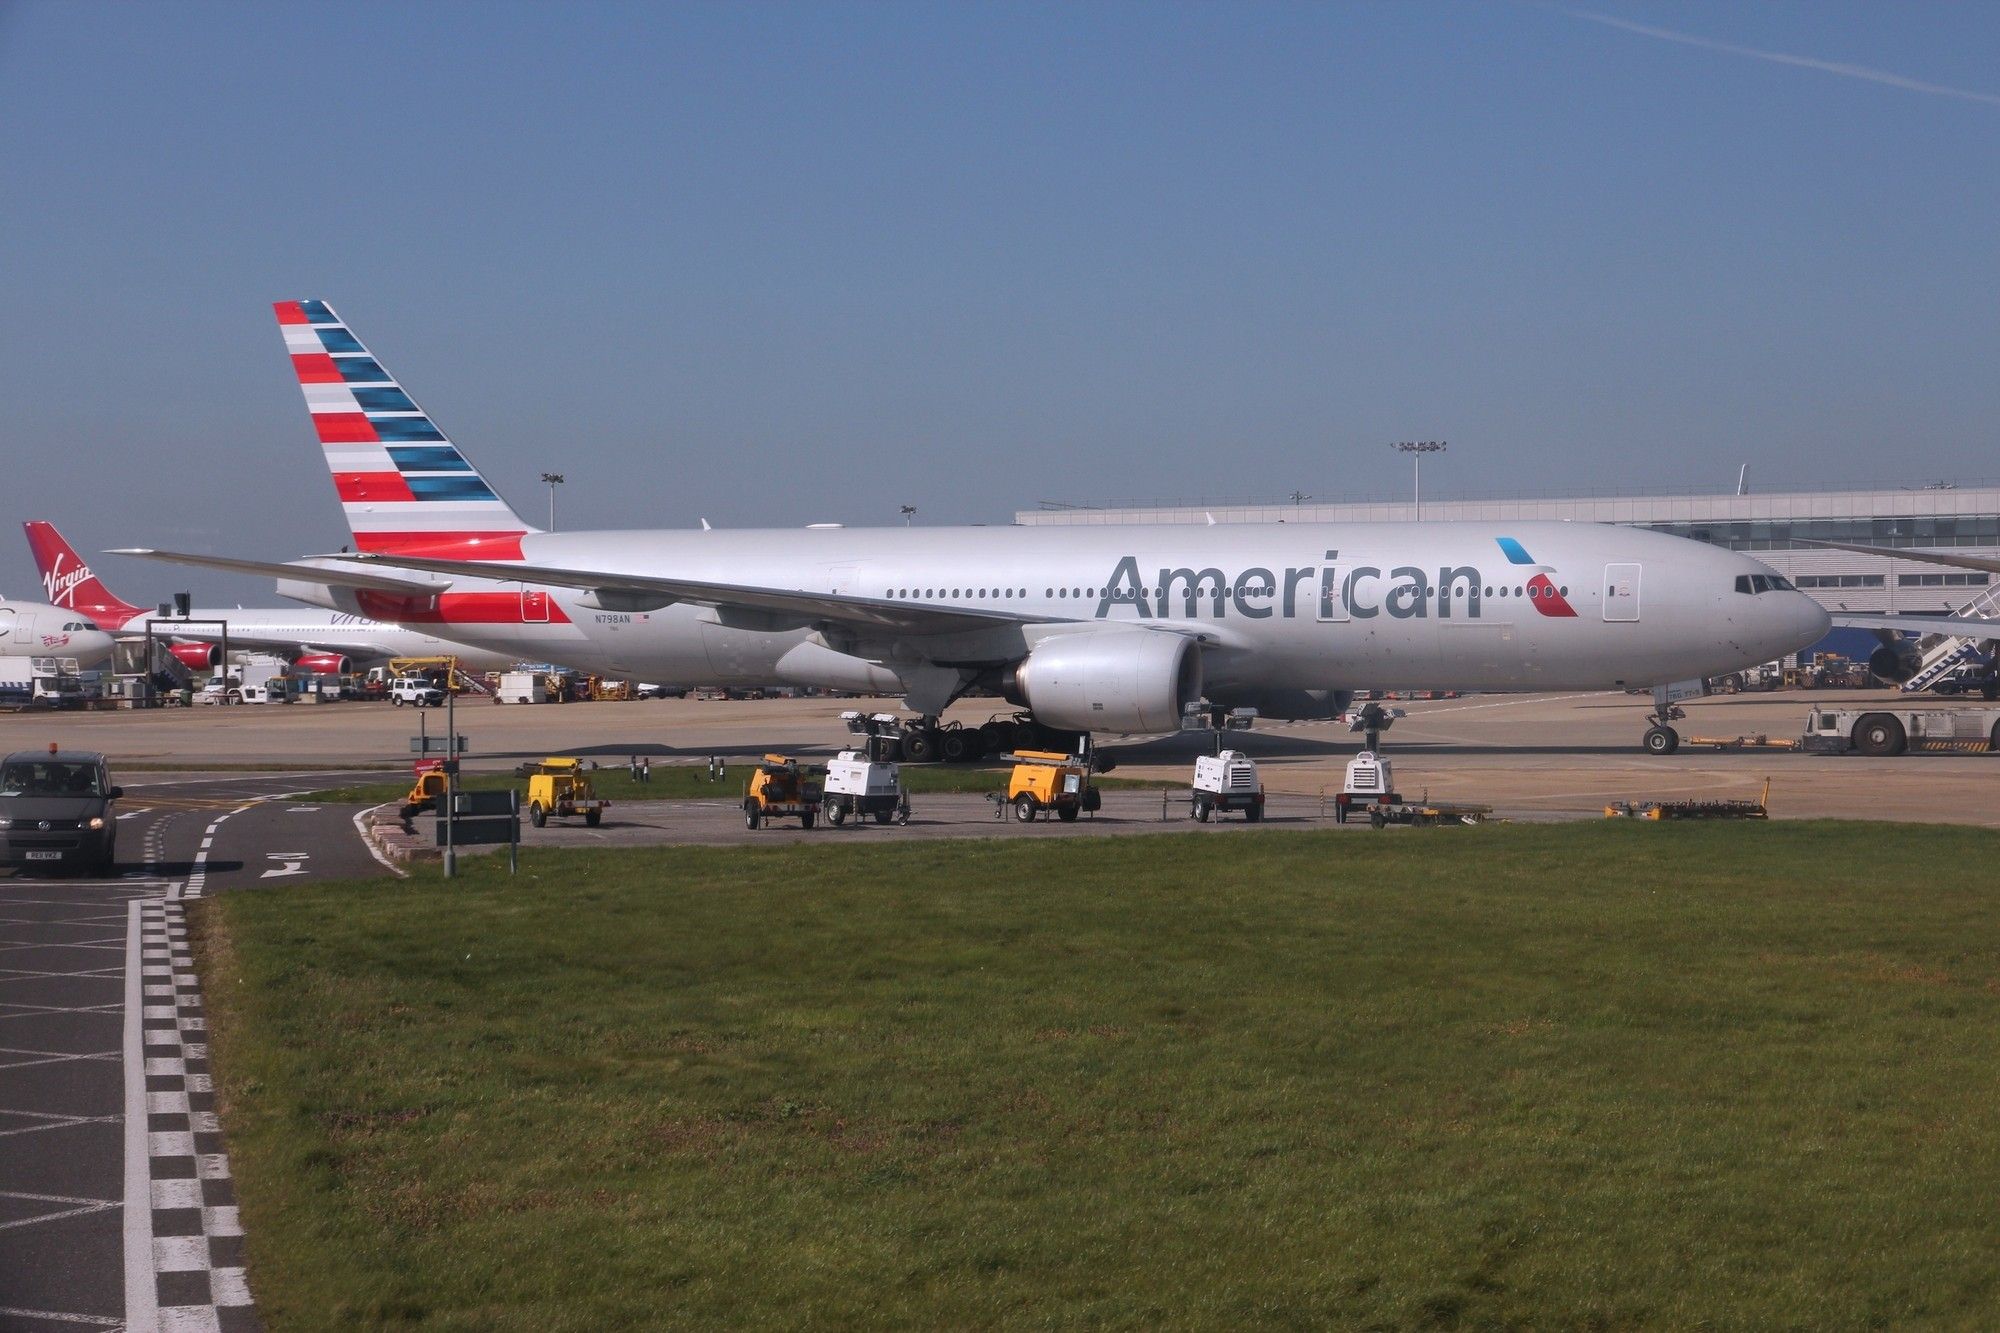 American Airlines passengers are challenging their COVID-19 refund policy.